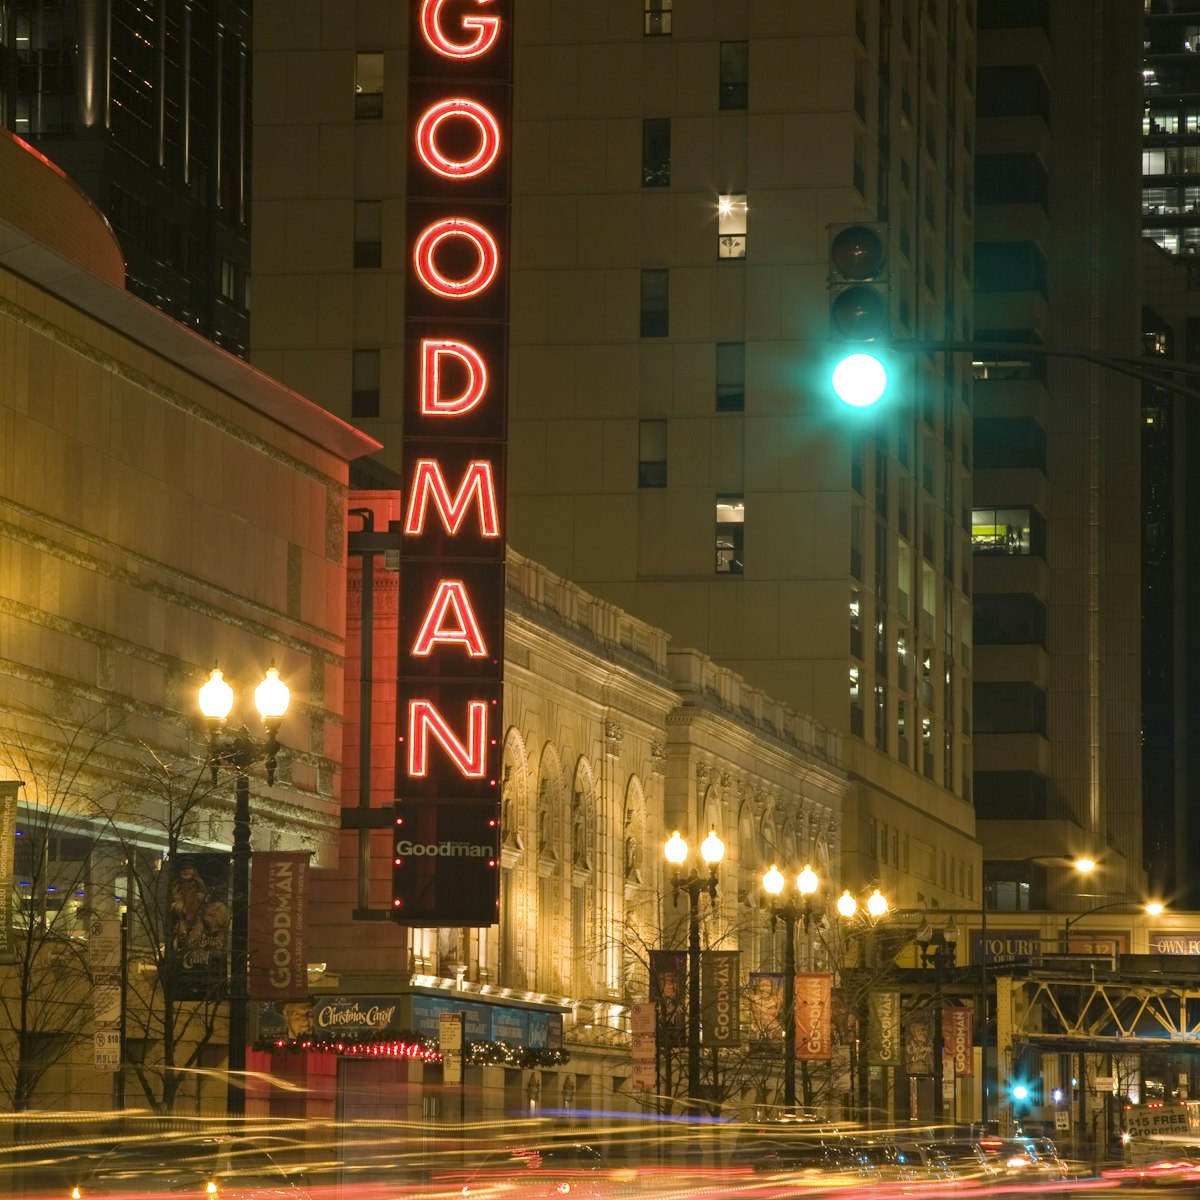 Lights from traffic in front of Goodman Theater